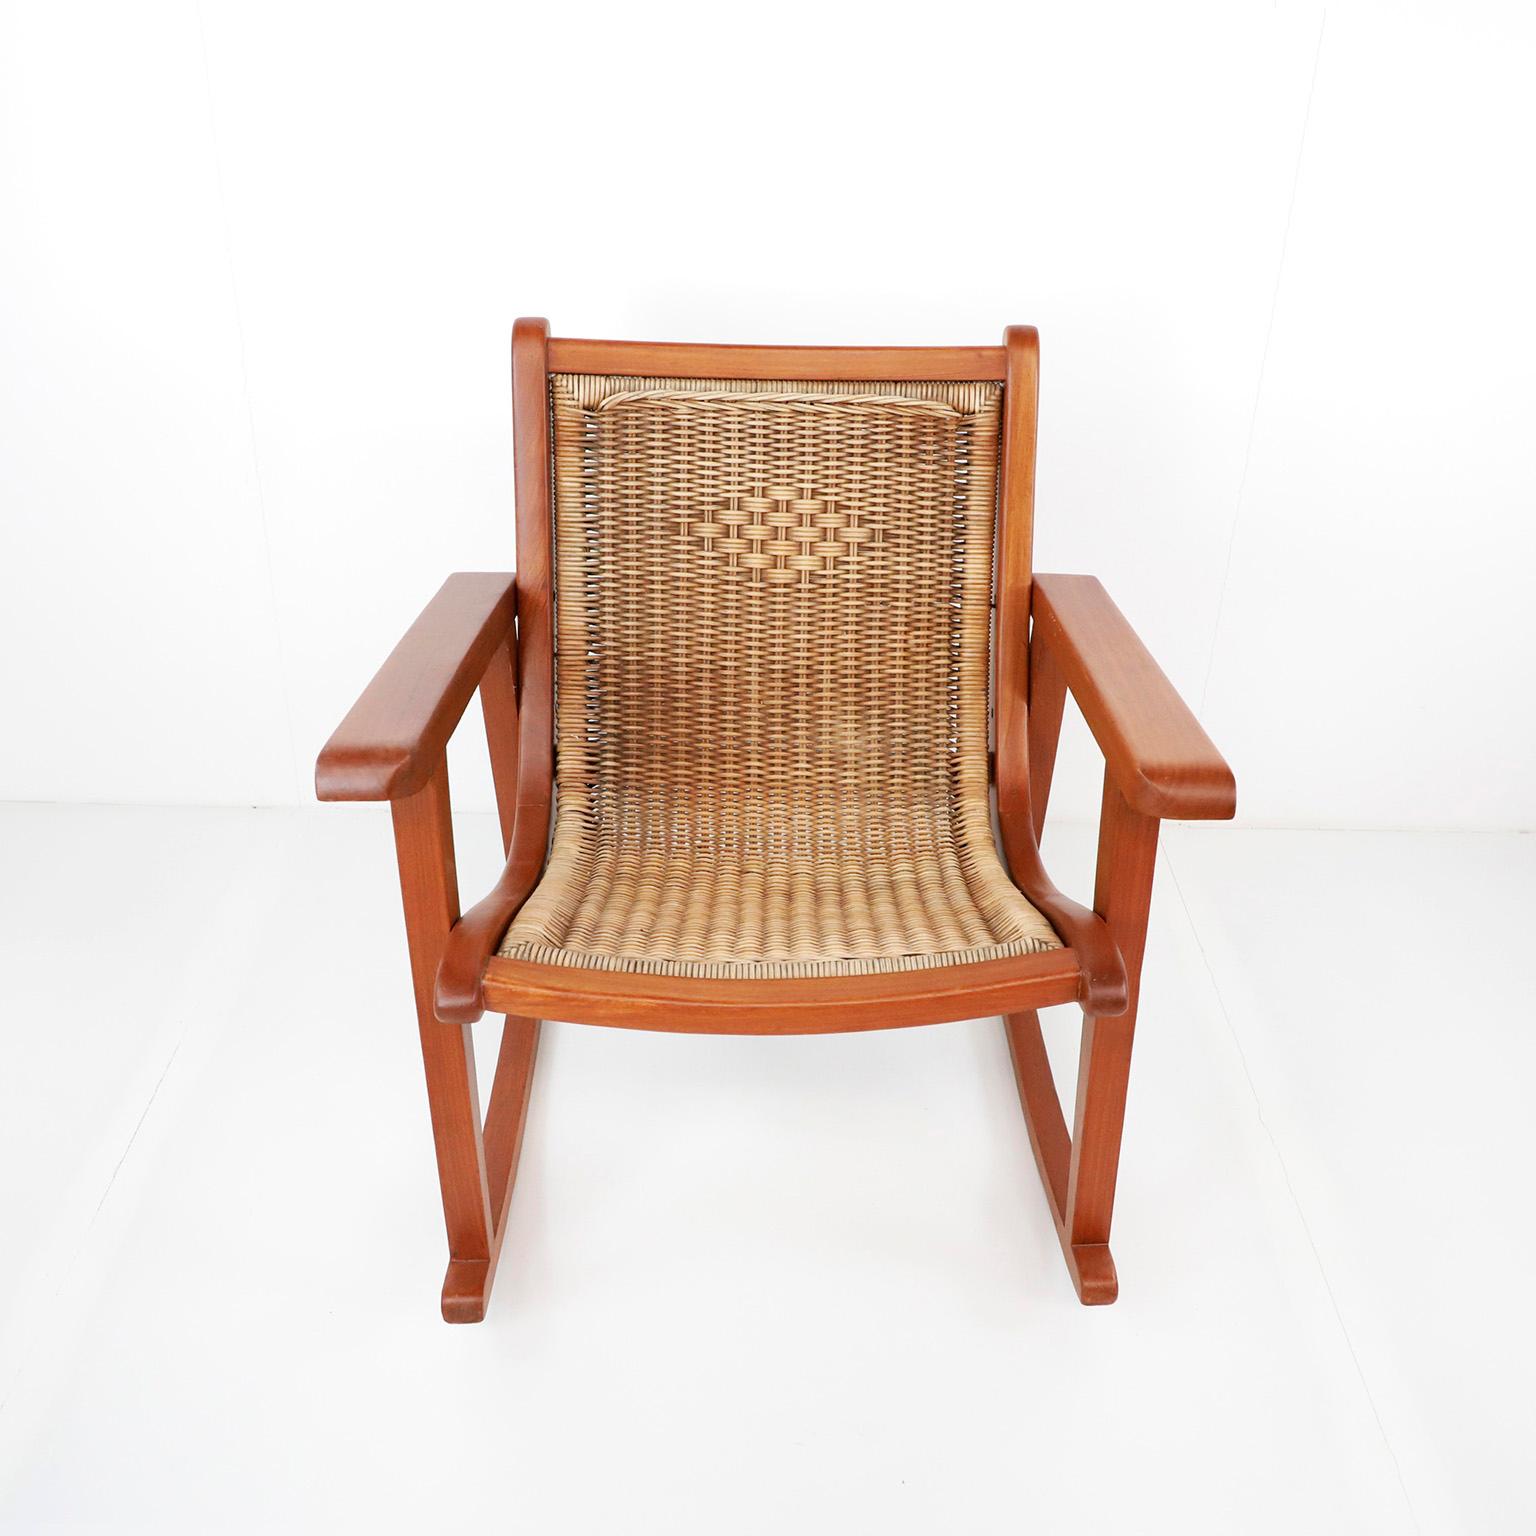 Ciraca 1950, we offer this Mexican rocking chair attributed to Michael van Beuren made in mahogany wood and recently professionally restored.